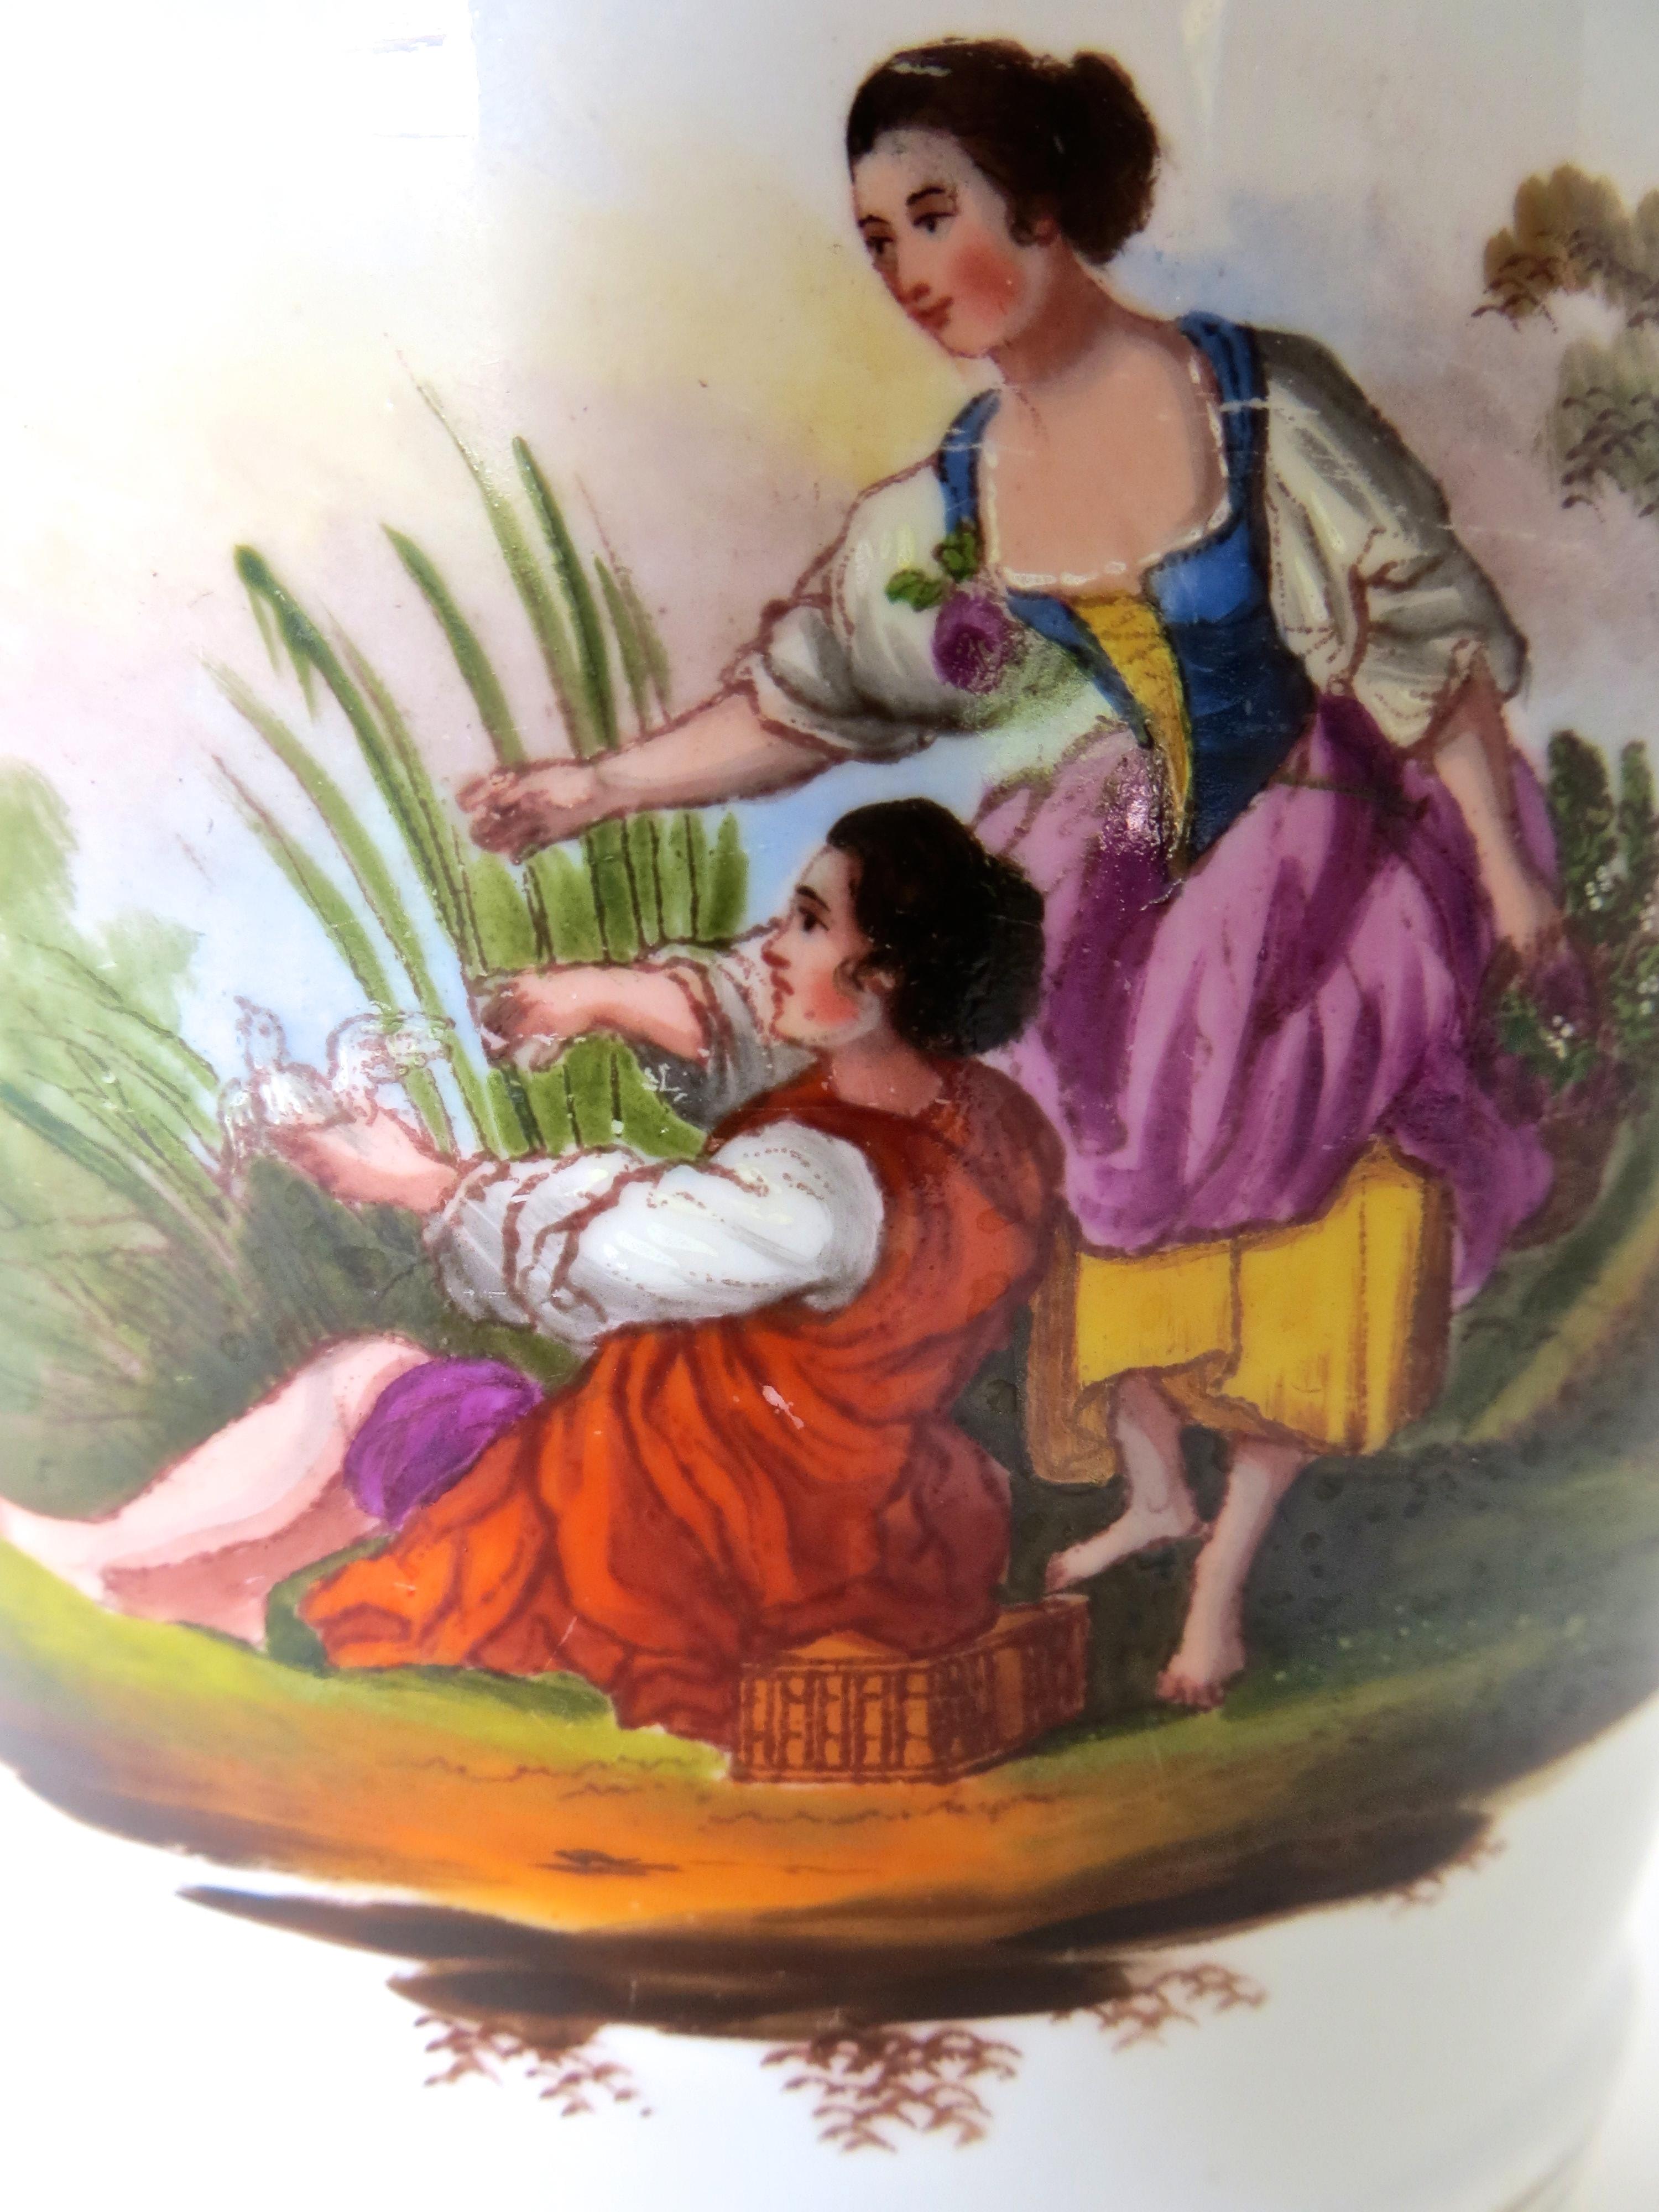 Fine quality English late 18th century faience planter or pot, with accompanying small porcelain stand. The hand painted image depicts a young couple handsomely dressed in bright colors, seated beneath a tree in a country setting (see image). A four